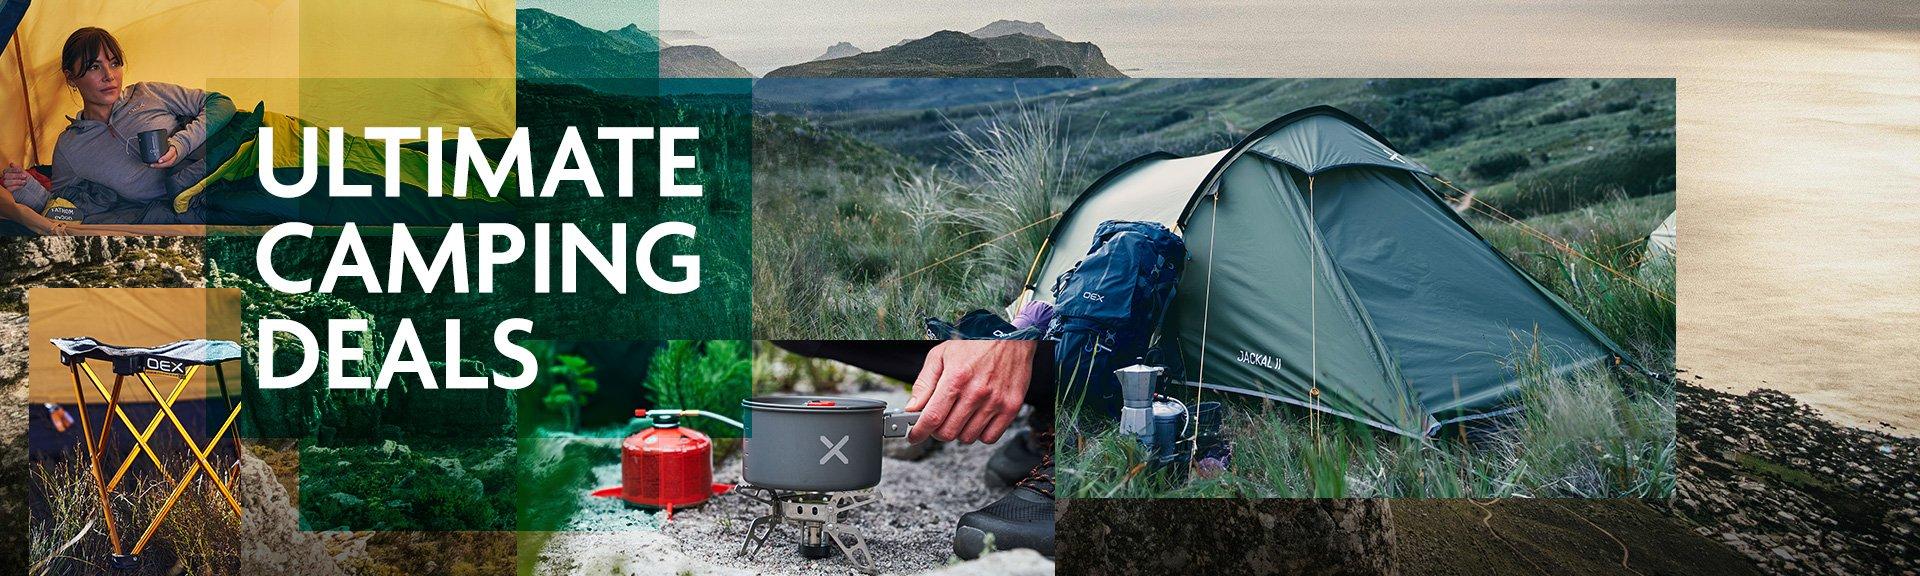 Quality Outdoor Clothing, Camping Equipment, Climbing Gear